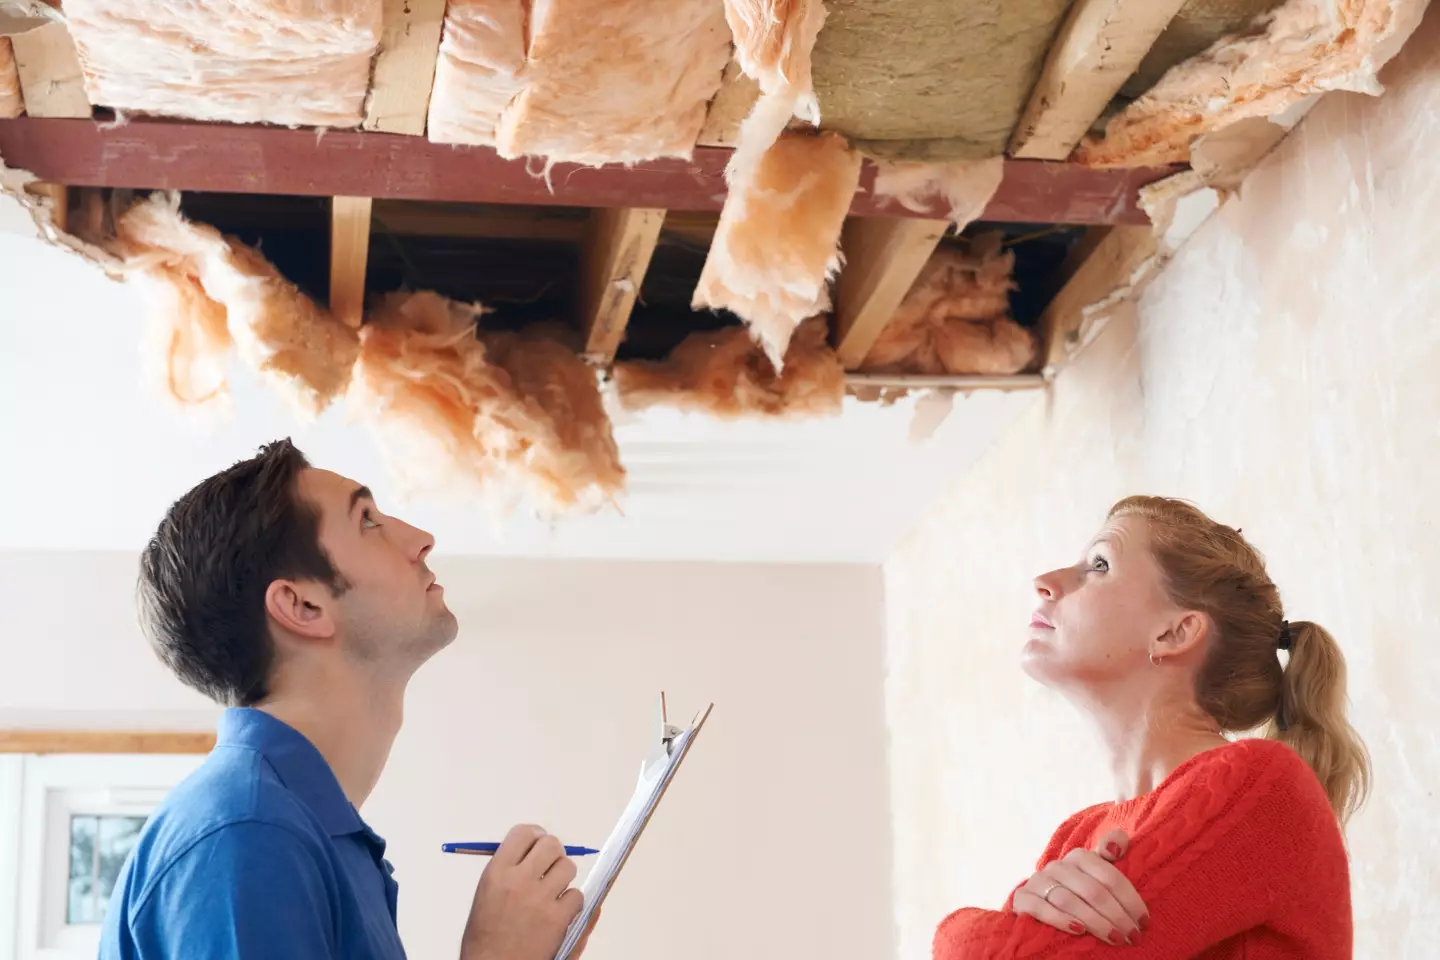 "So you see the problem here is there's a massive hole in your ceiling, that'll cost you a bit."